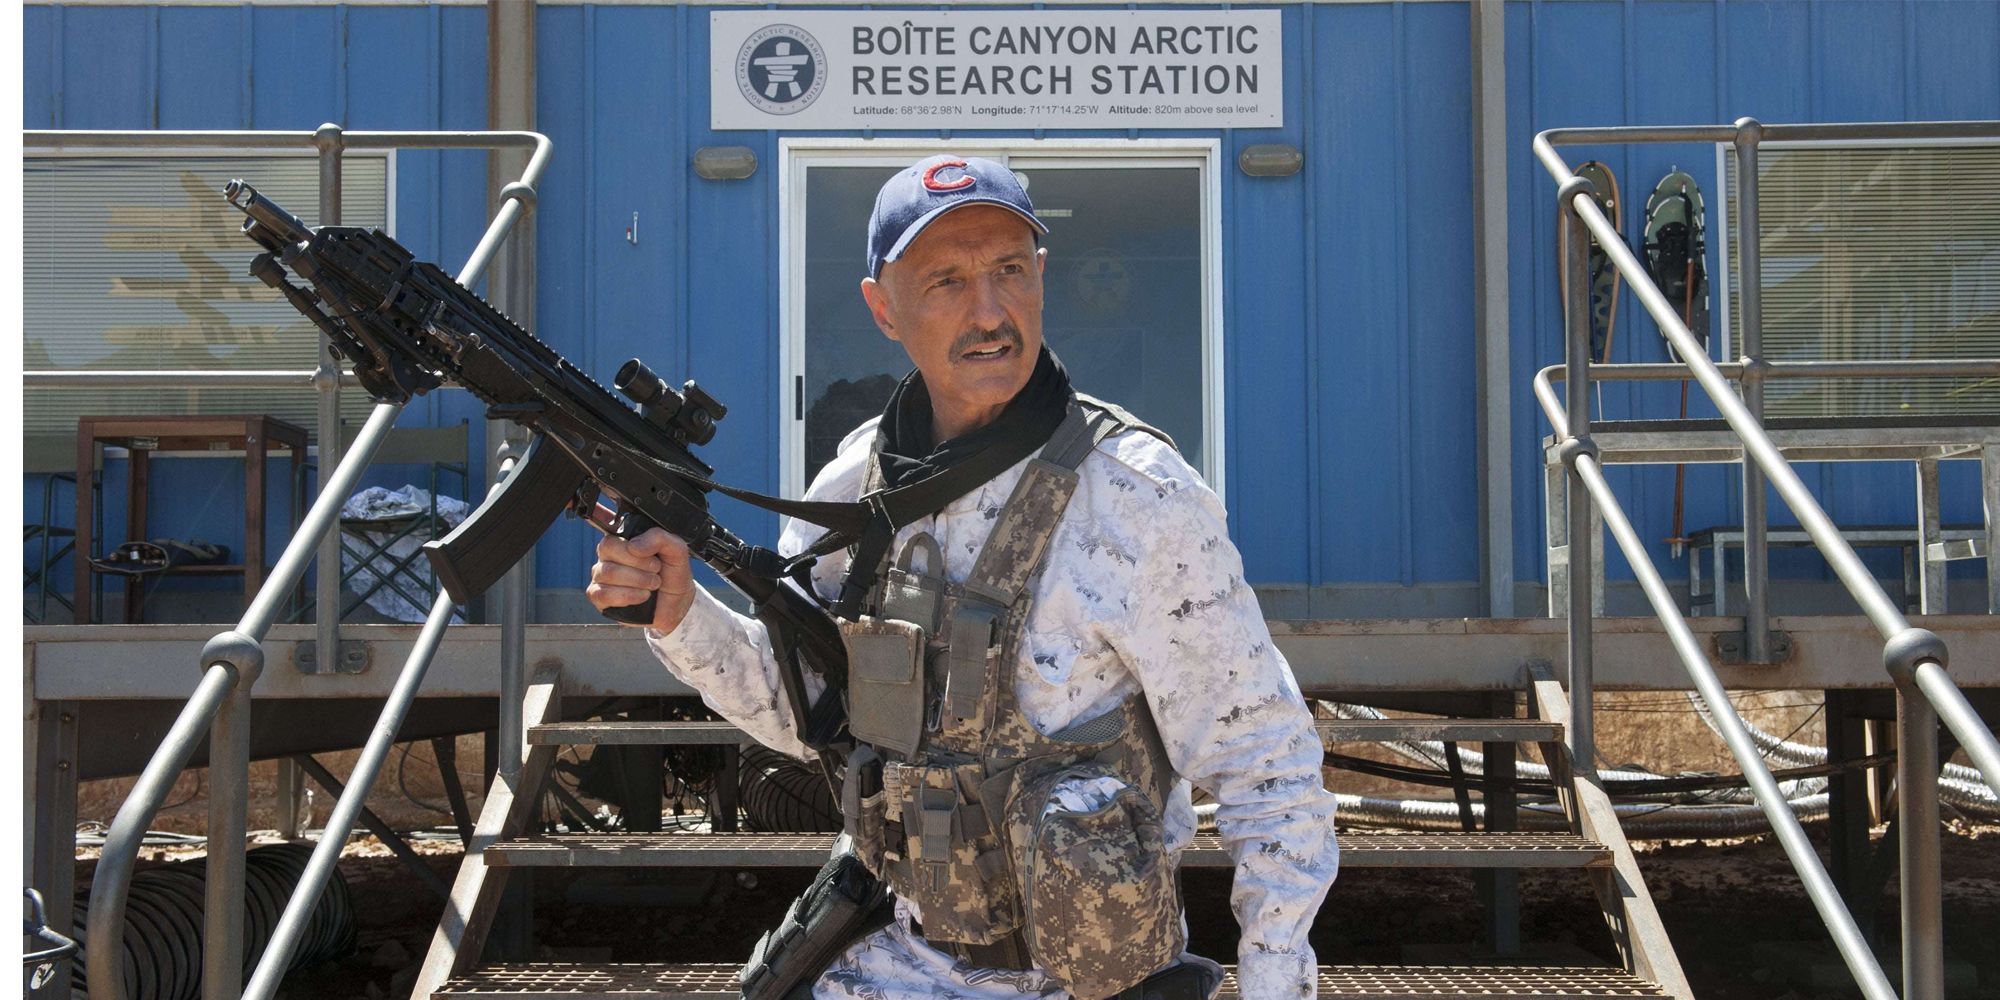 Michael Gross at the Arctic Research Station in Tremors: A Cold Day in Hell